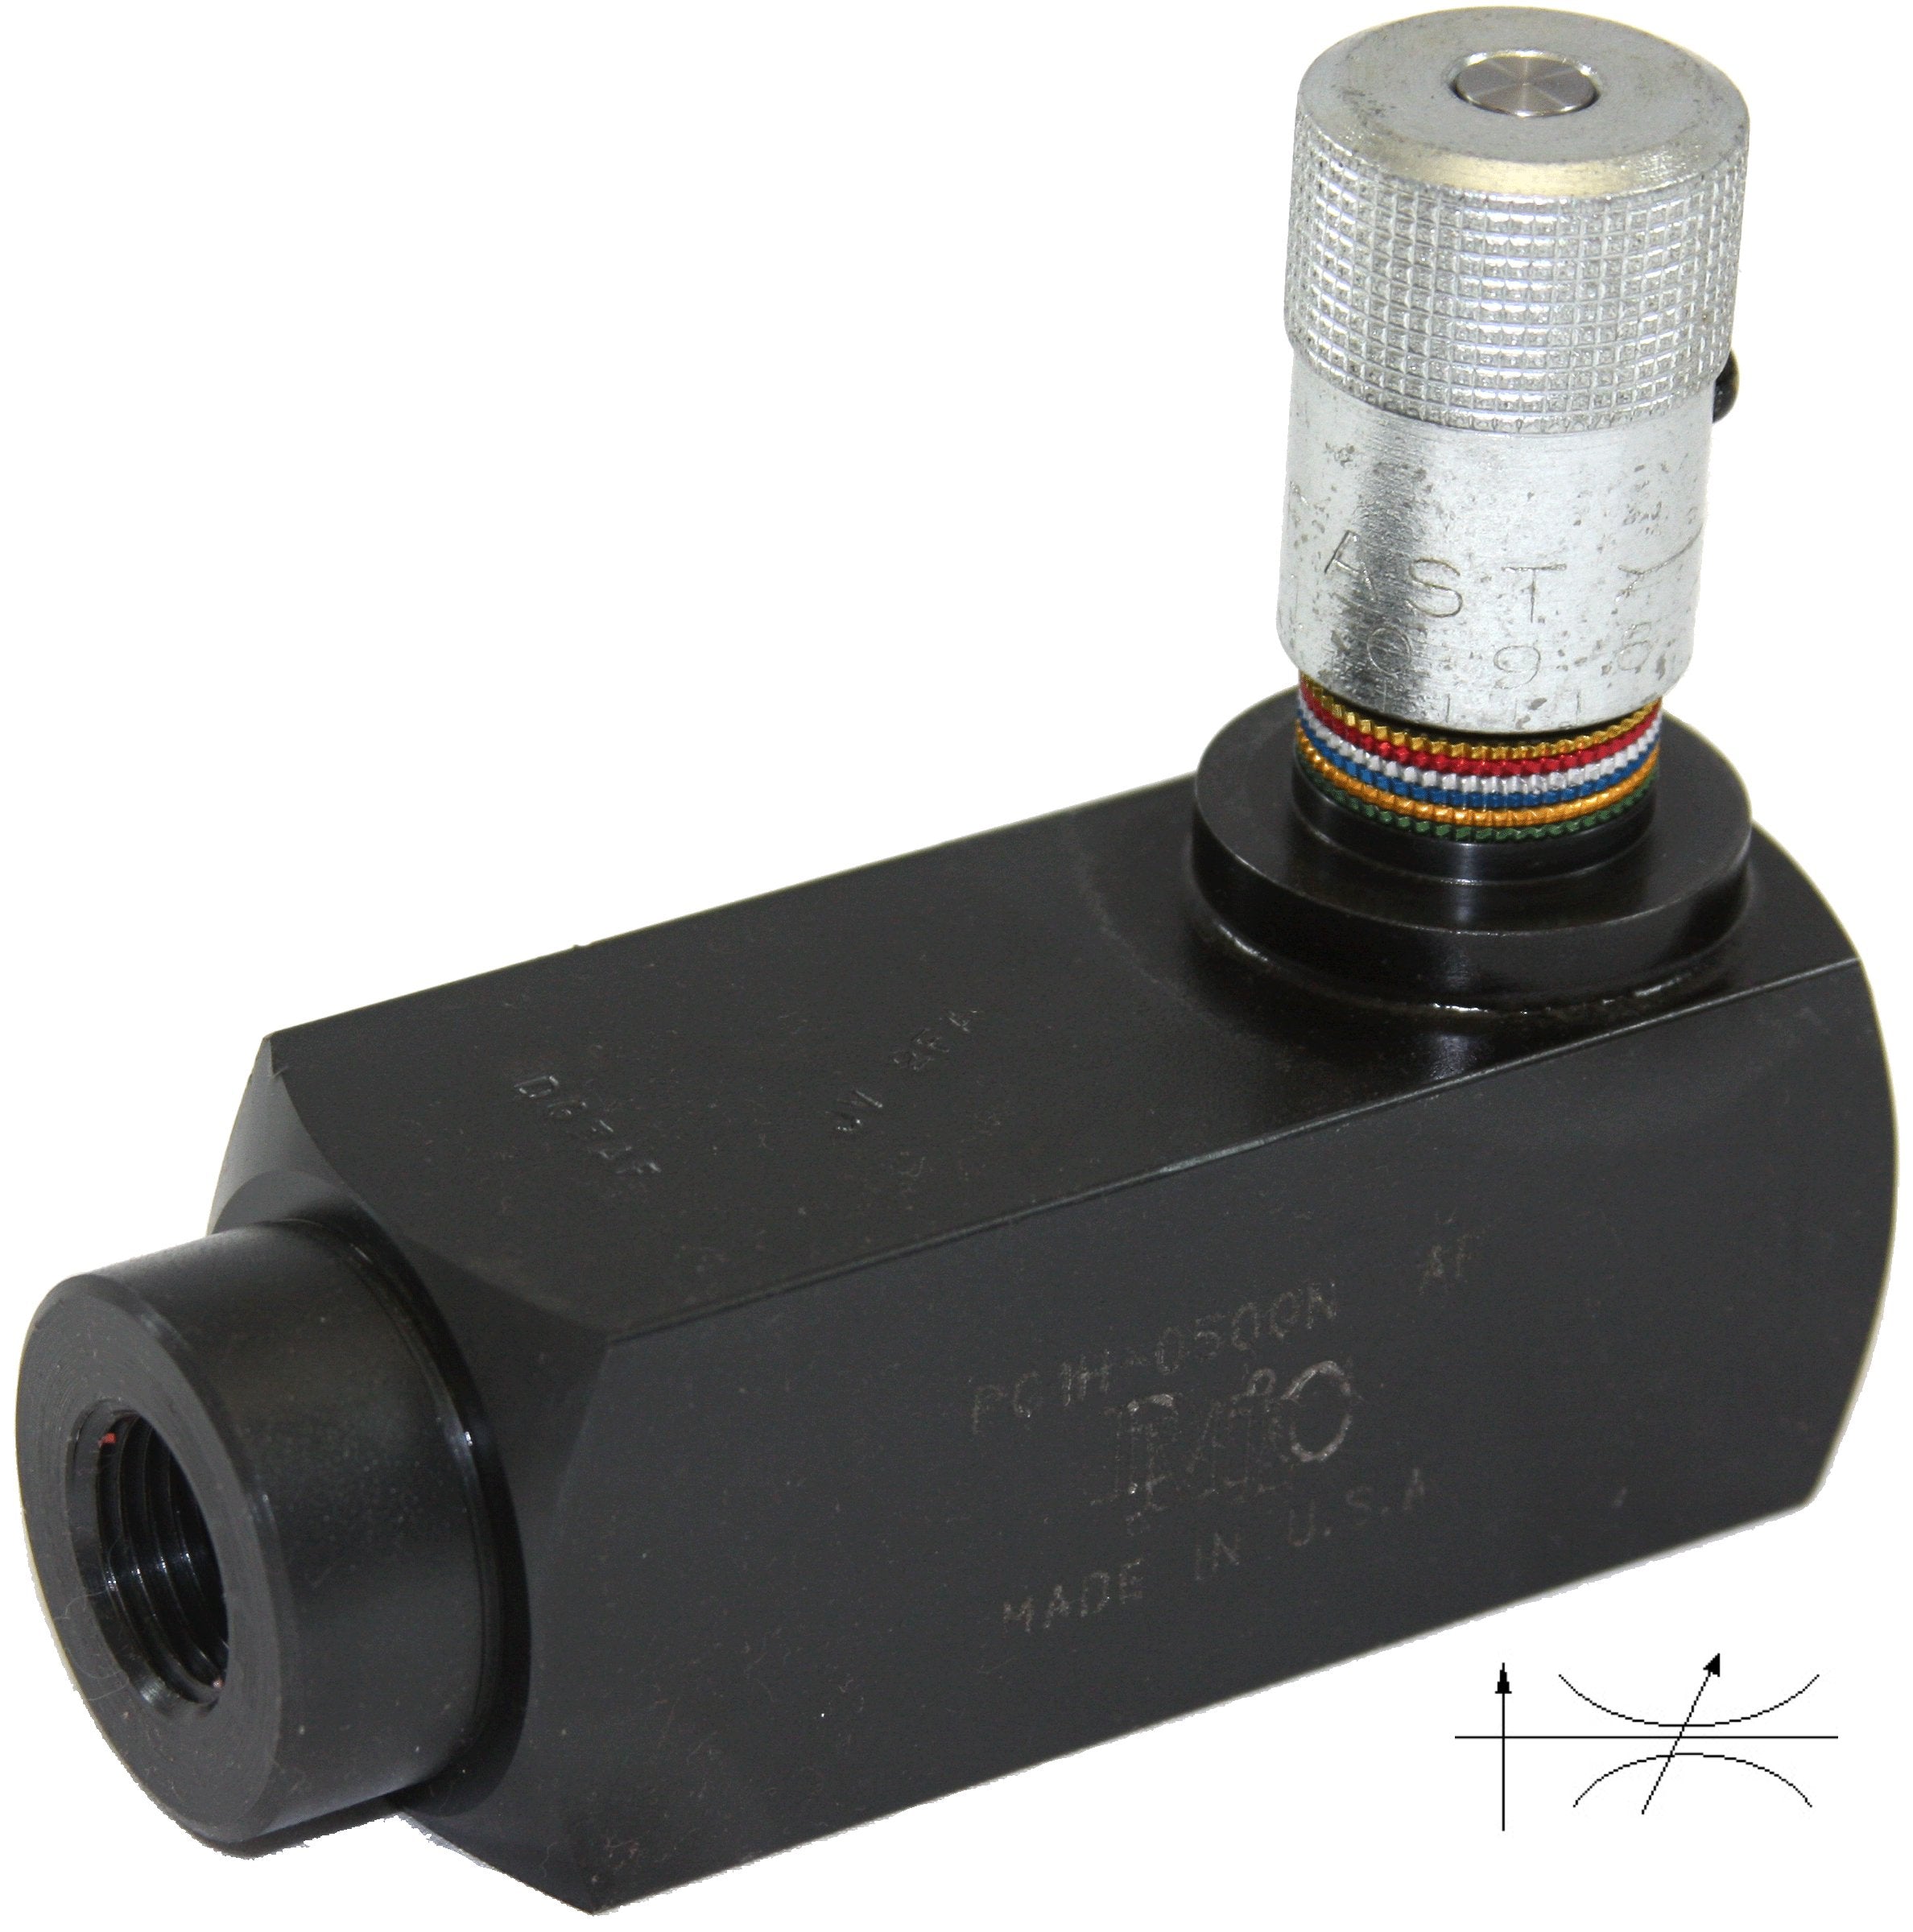 PC1H-1000S : DMIC Pressure Comp Flow Control, Unidirectional, Metered, with Check, #16 SAE (1"), 3000psi, Carbon Steel